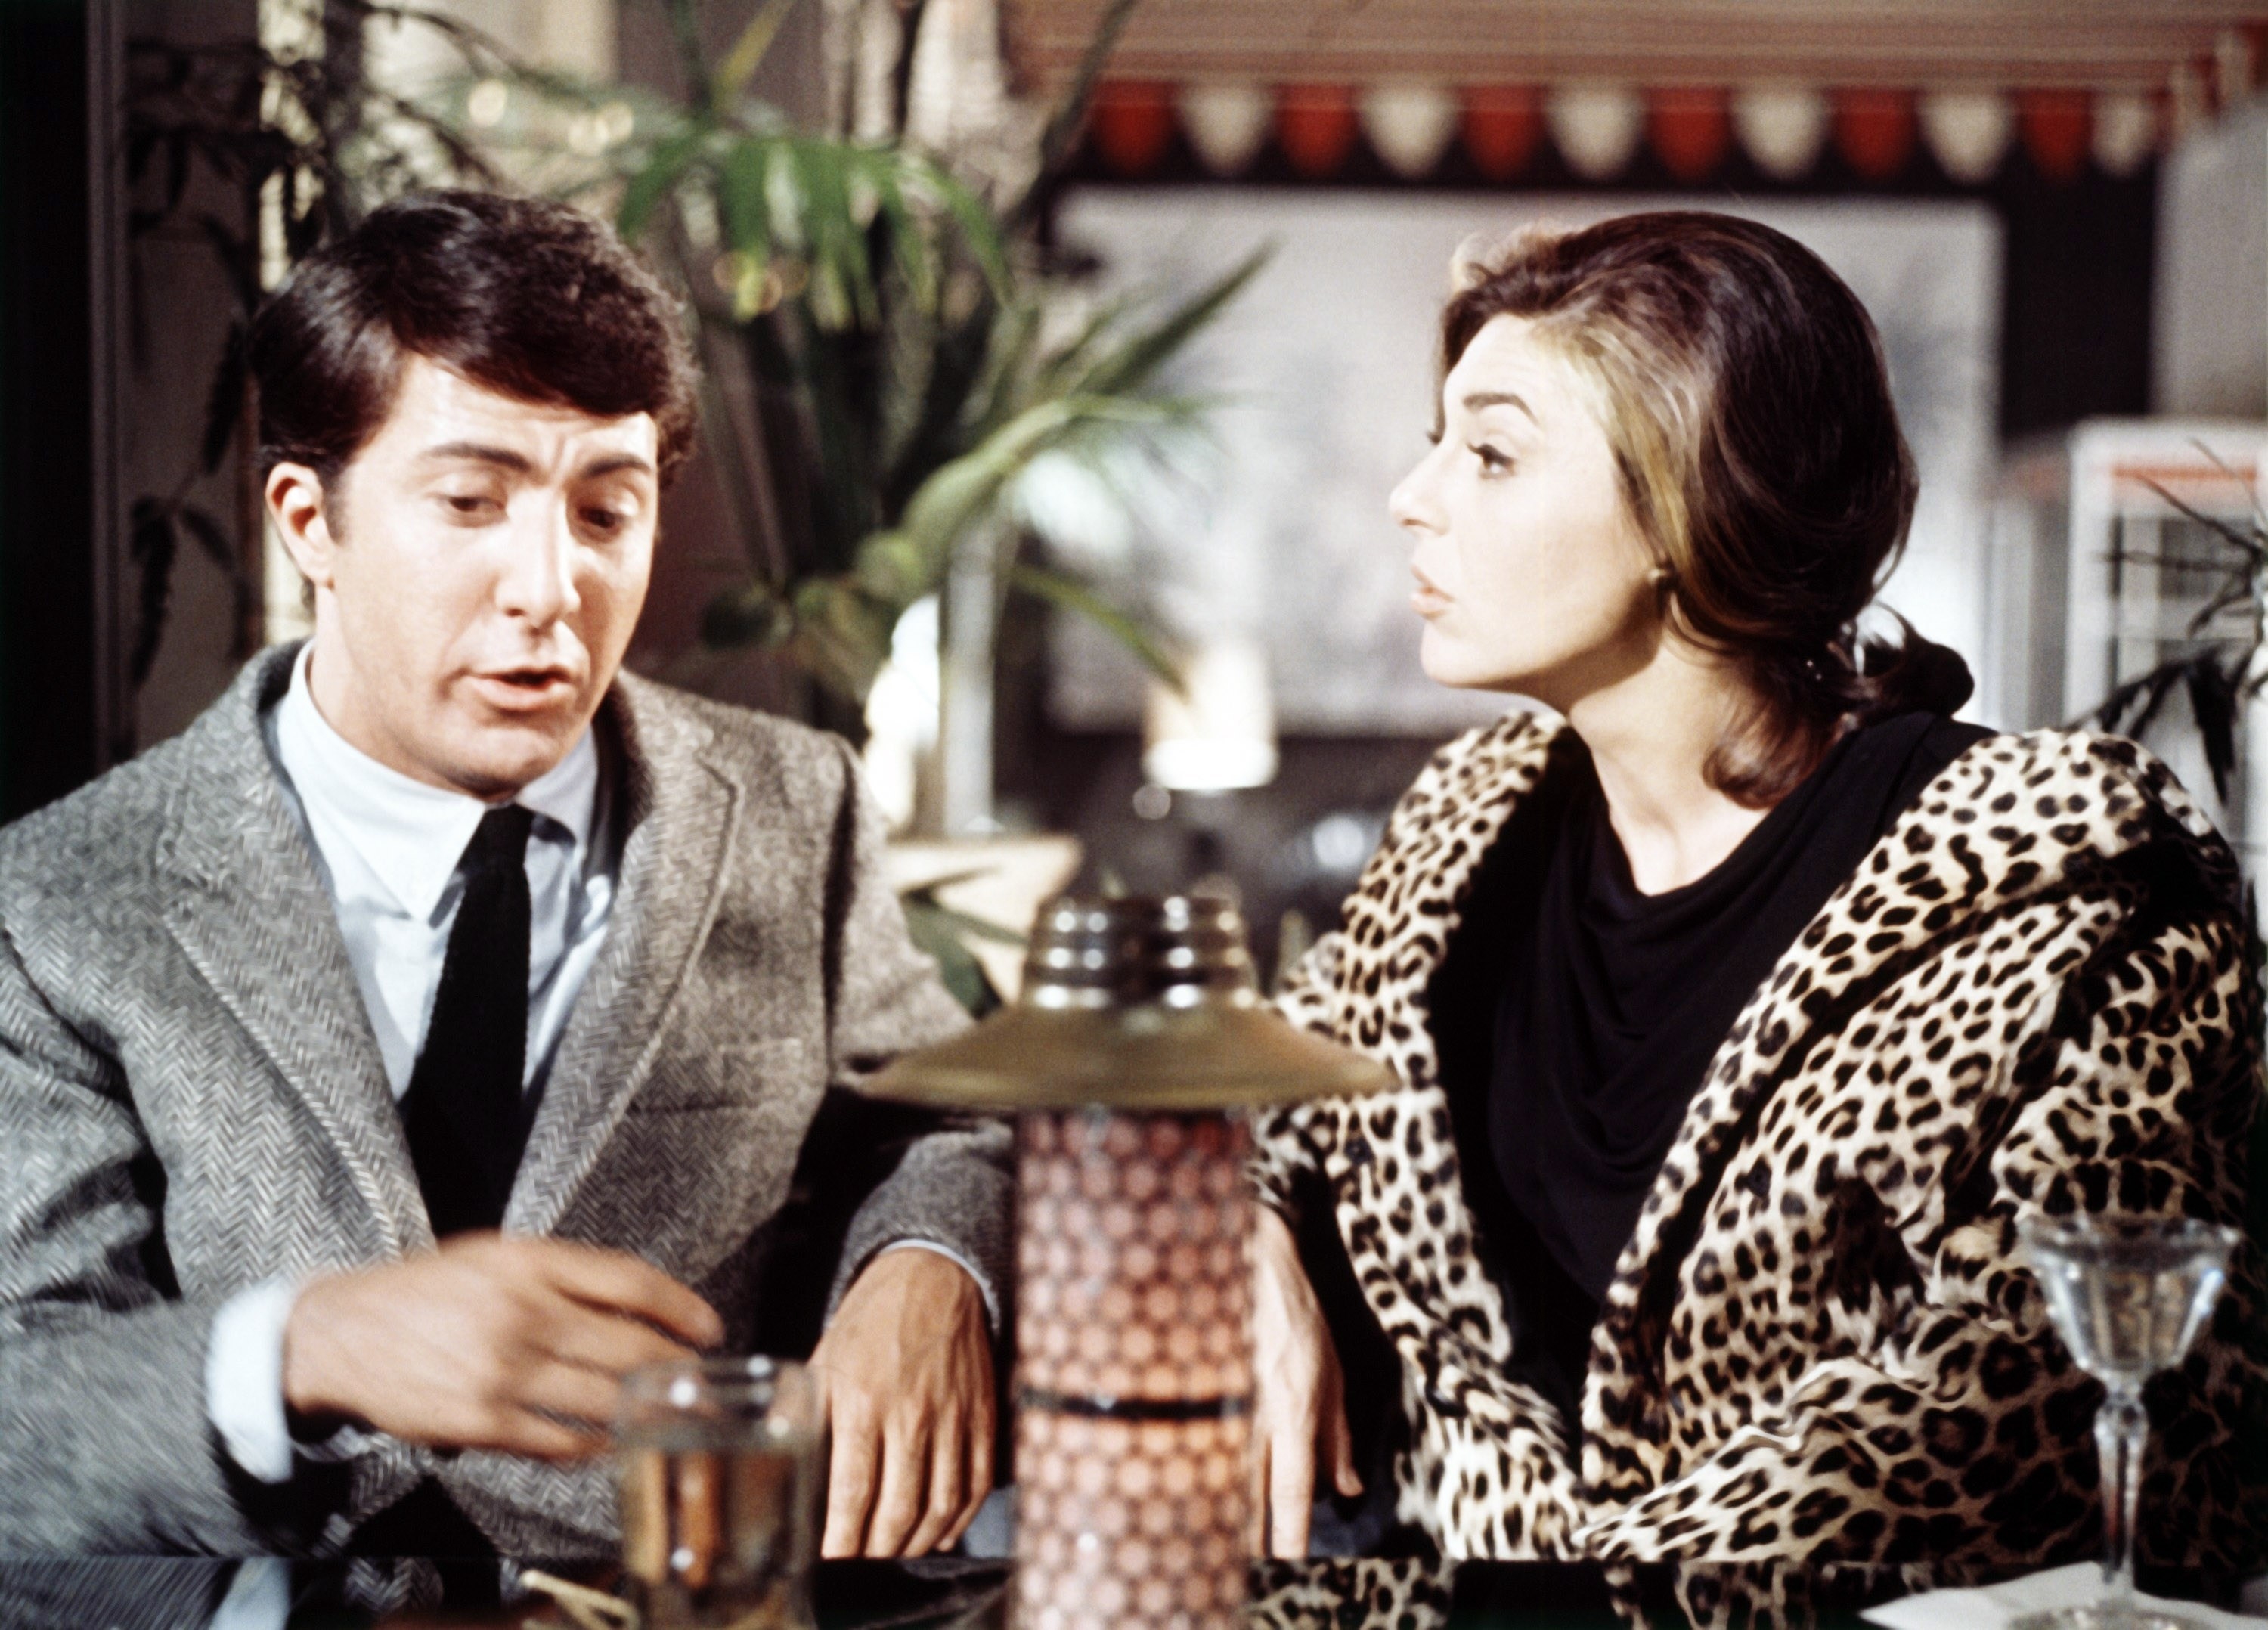 Dustin Hoffman talks with Anne Bancroft over a drink